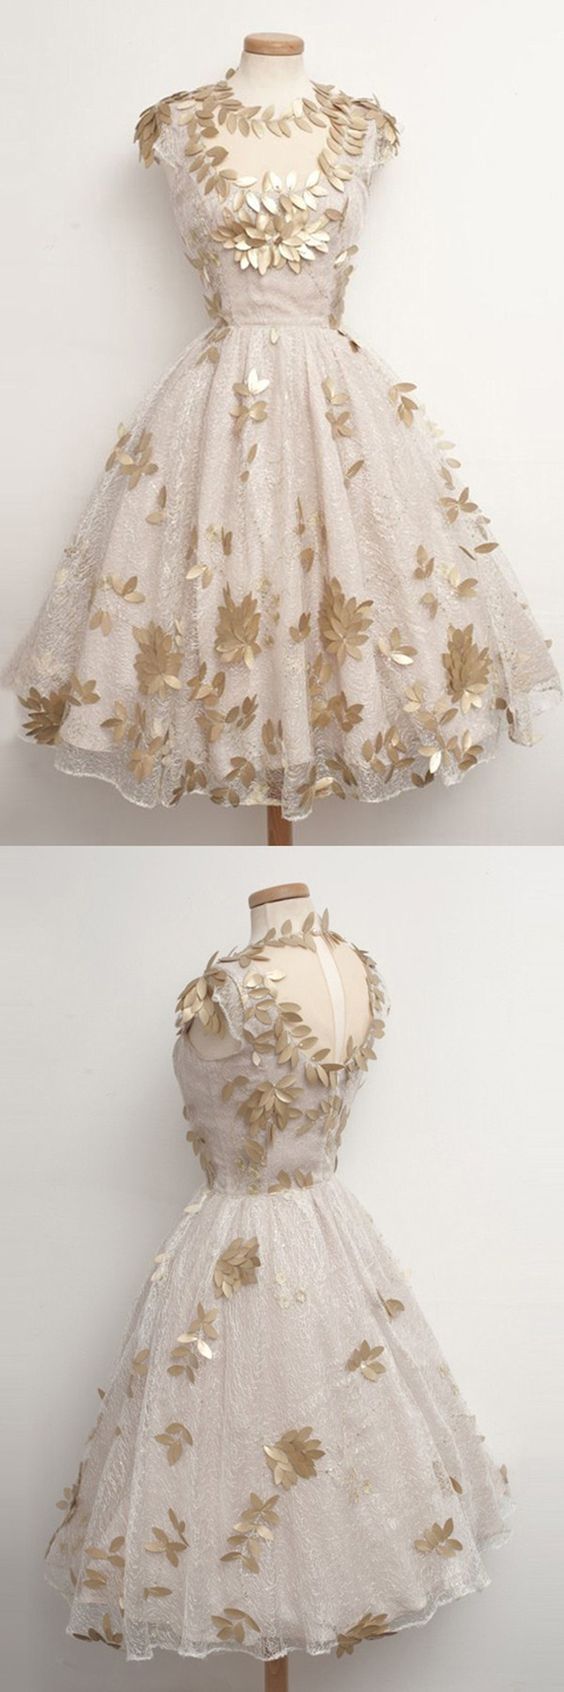 Glamorous Tea Length Cap Sleeves Ivory Homecoming Dress with Gold Pattern   cg11983